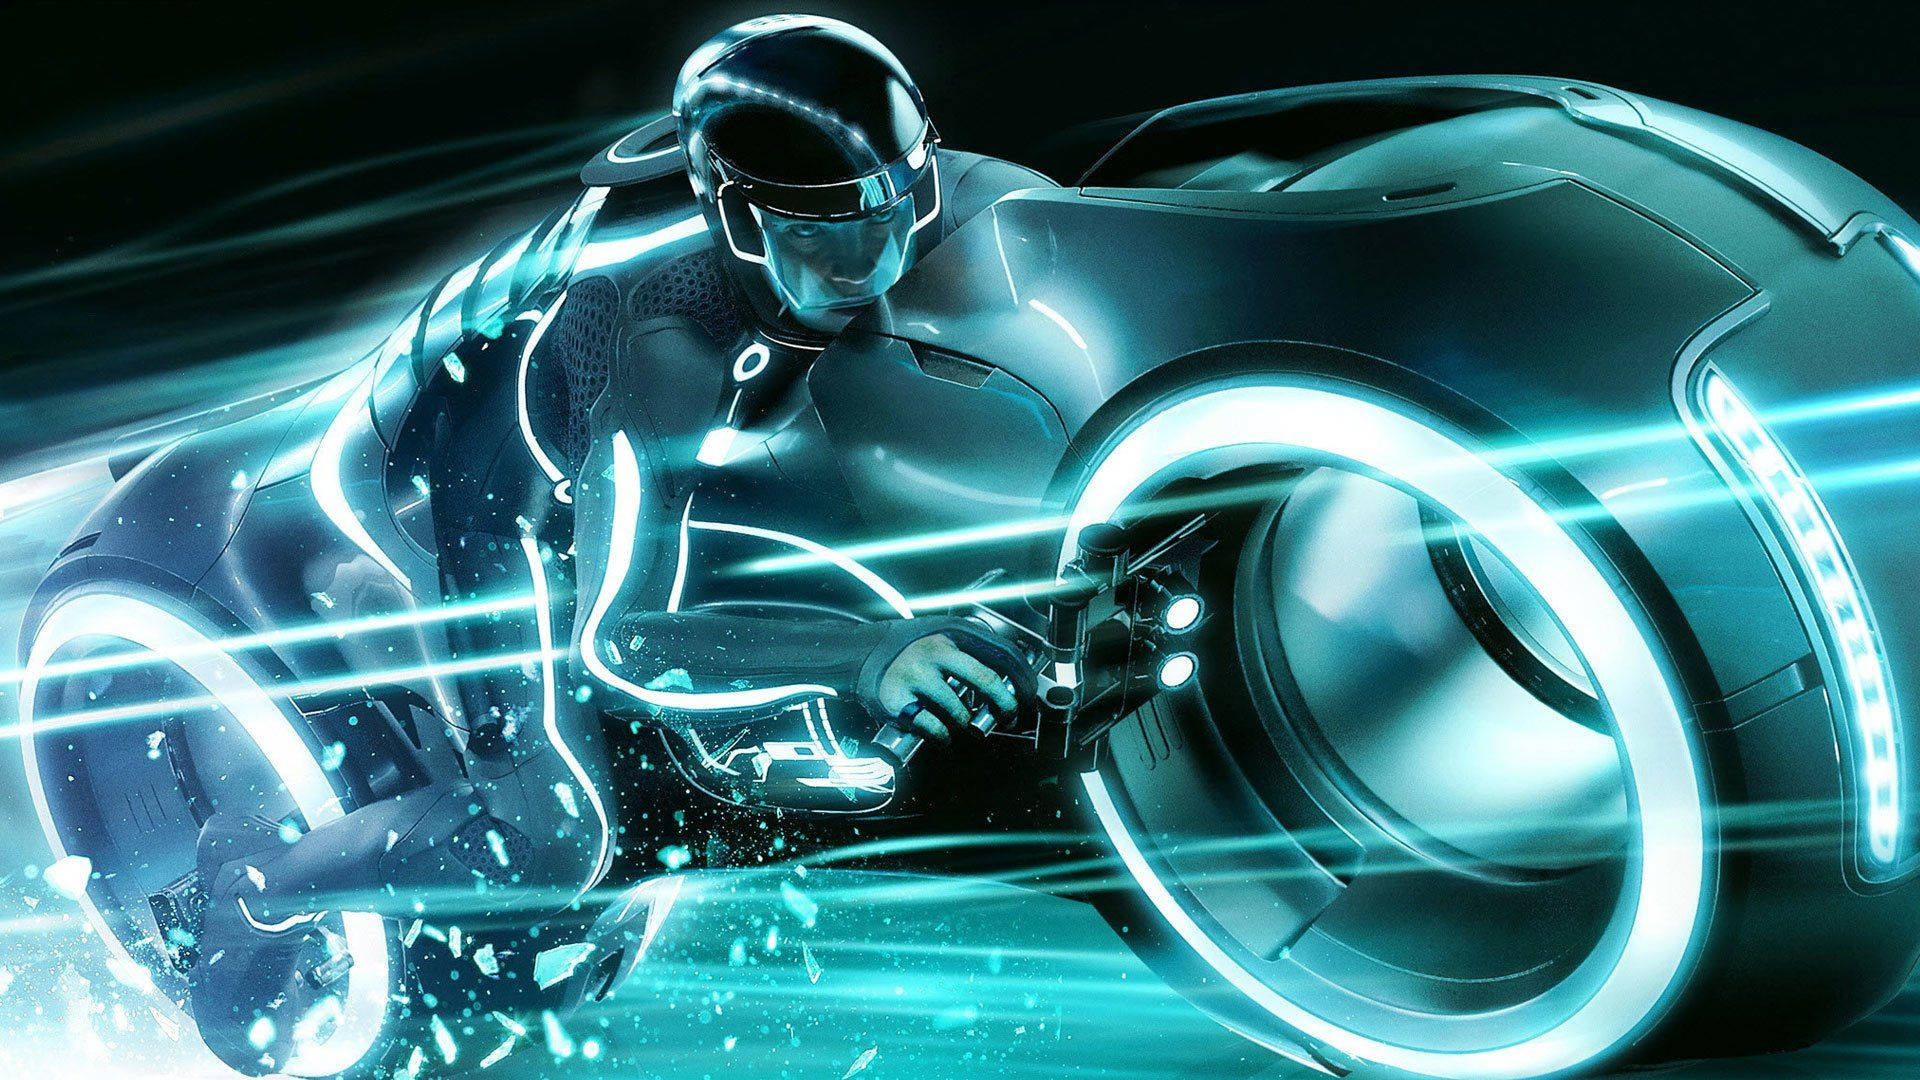 Explore the city of Tron in Tron Legacy Wallpaper